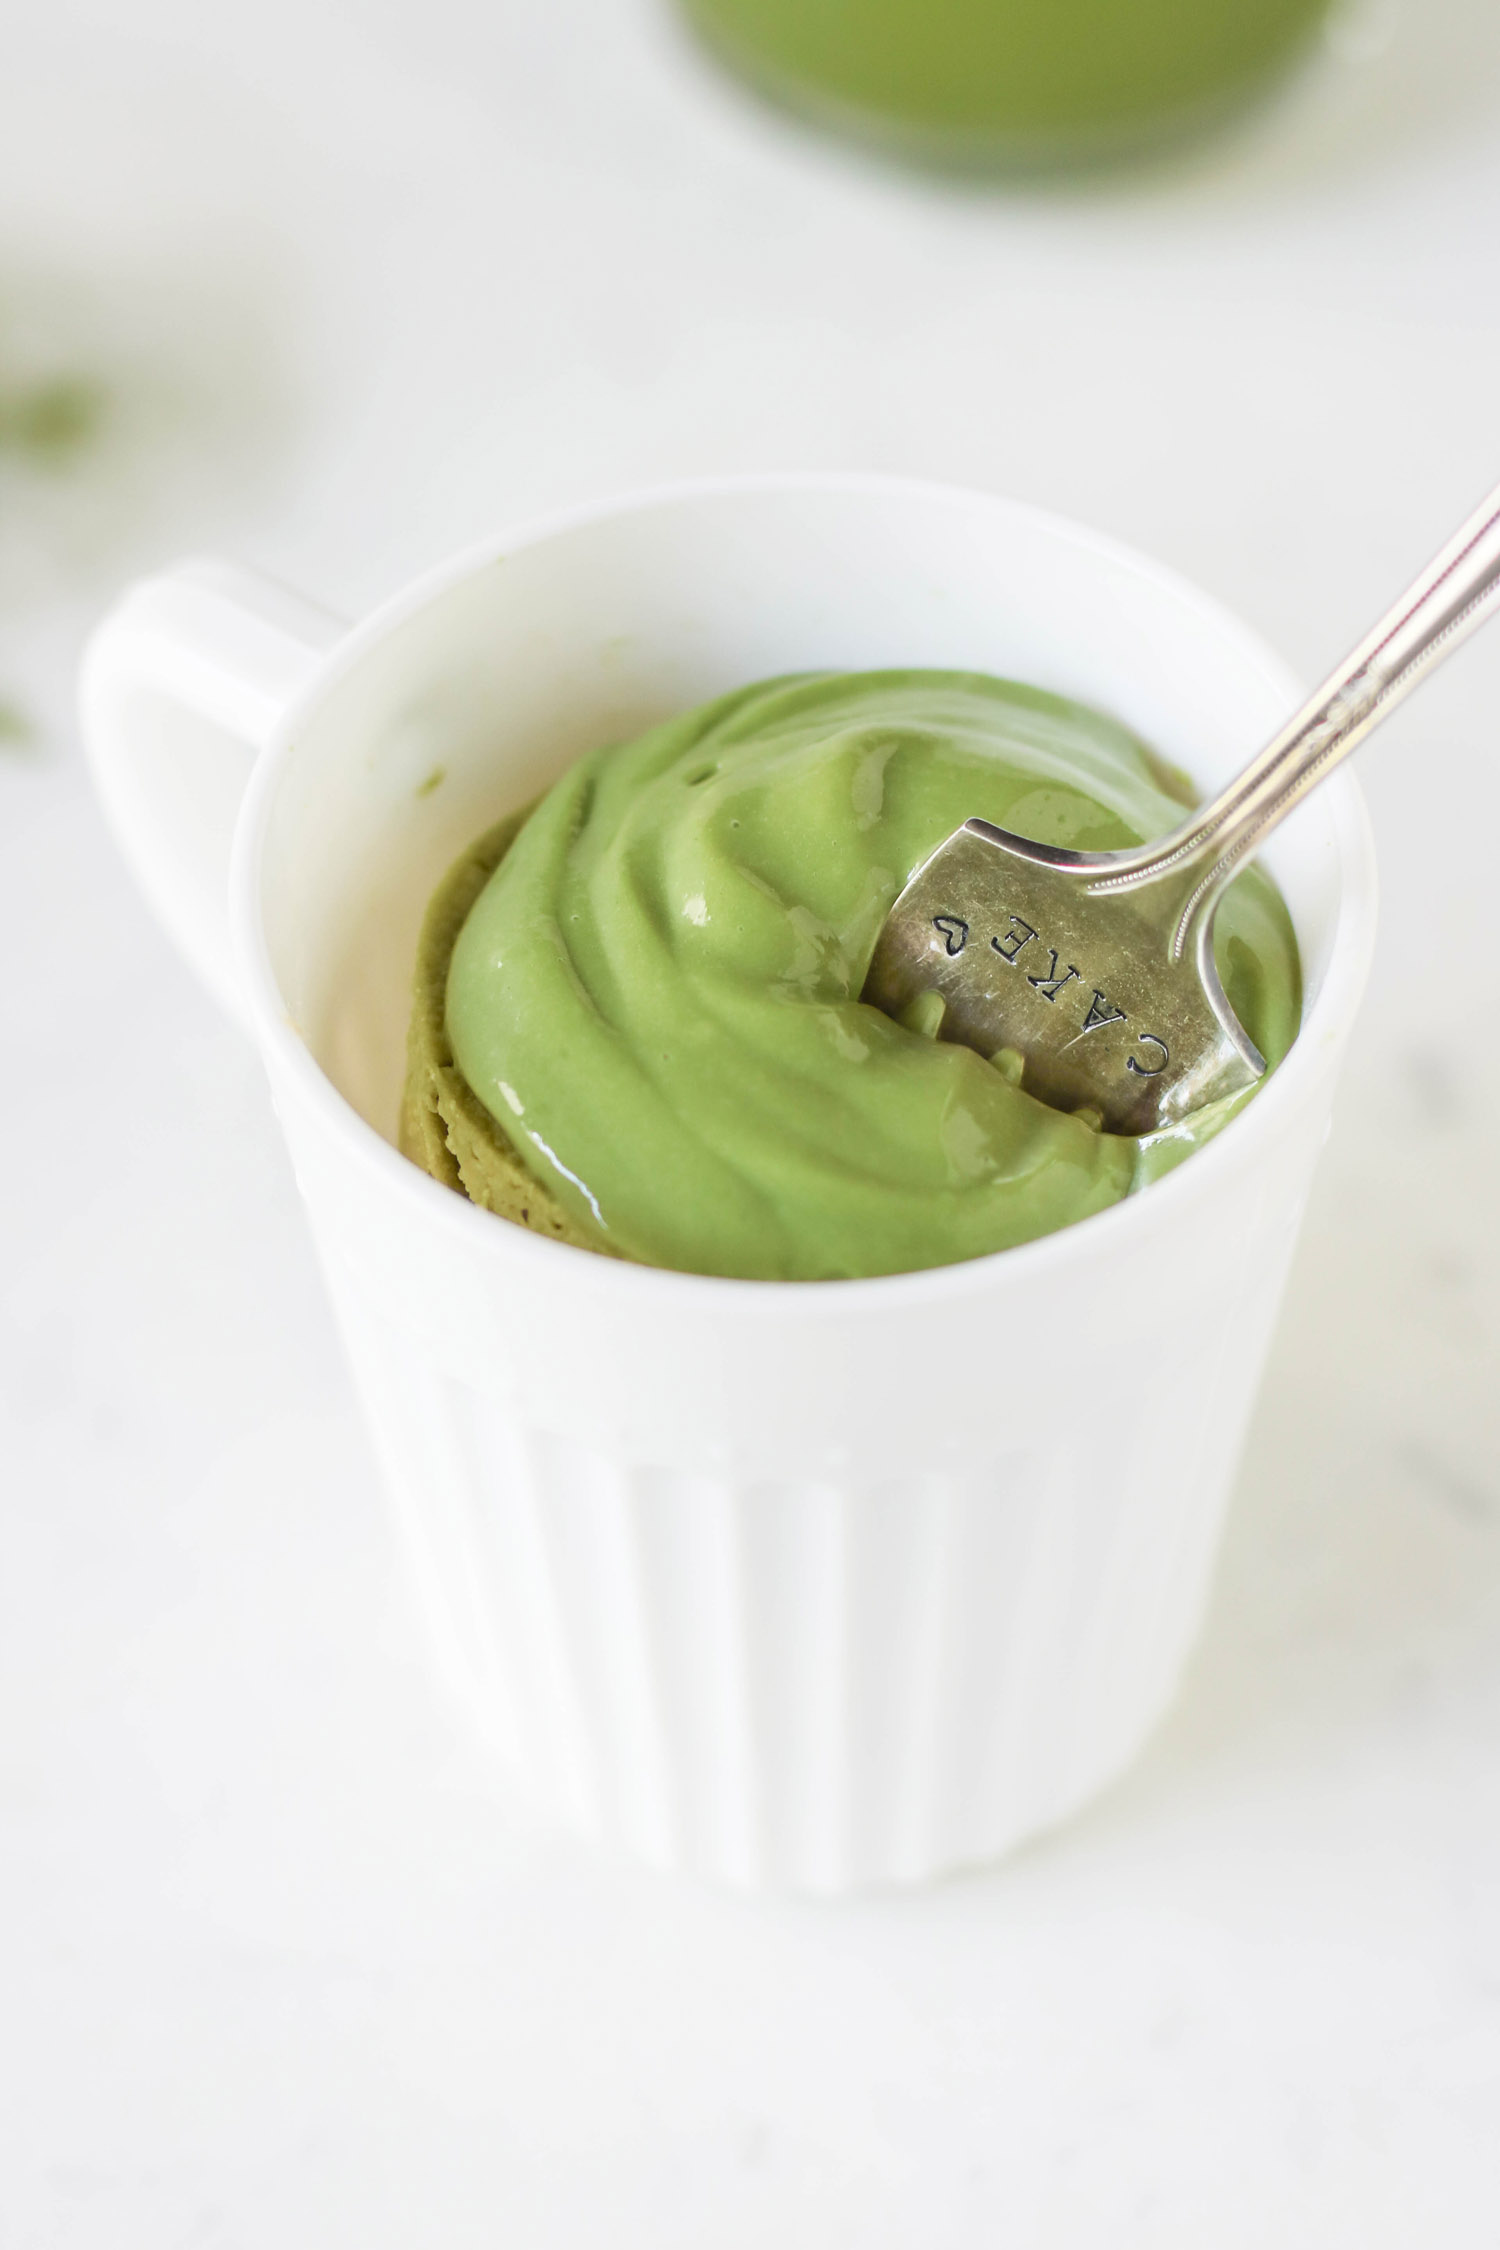 You can make this Healthy Single-Serving Matcha Microwave Cake in TWO minutes flat! This soft, springy, delicious cake makes the perfect balanced breakfast, snack, AND dessert. Plus, a Matcha Protein Frosting to top it off. This entire recipe has just 180 calories, and is sugar free, low carb, high protein, high fiber, and gluten free too! Healthy dessert recipes at the Desserts With Benefits Blog (www.DessertsWithBenefits.com)